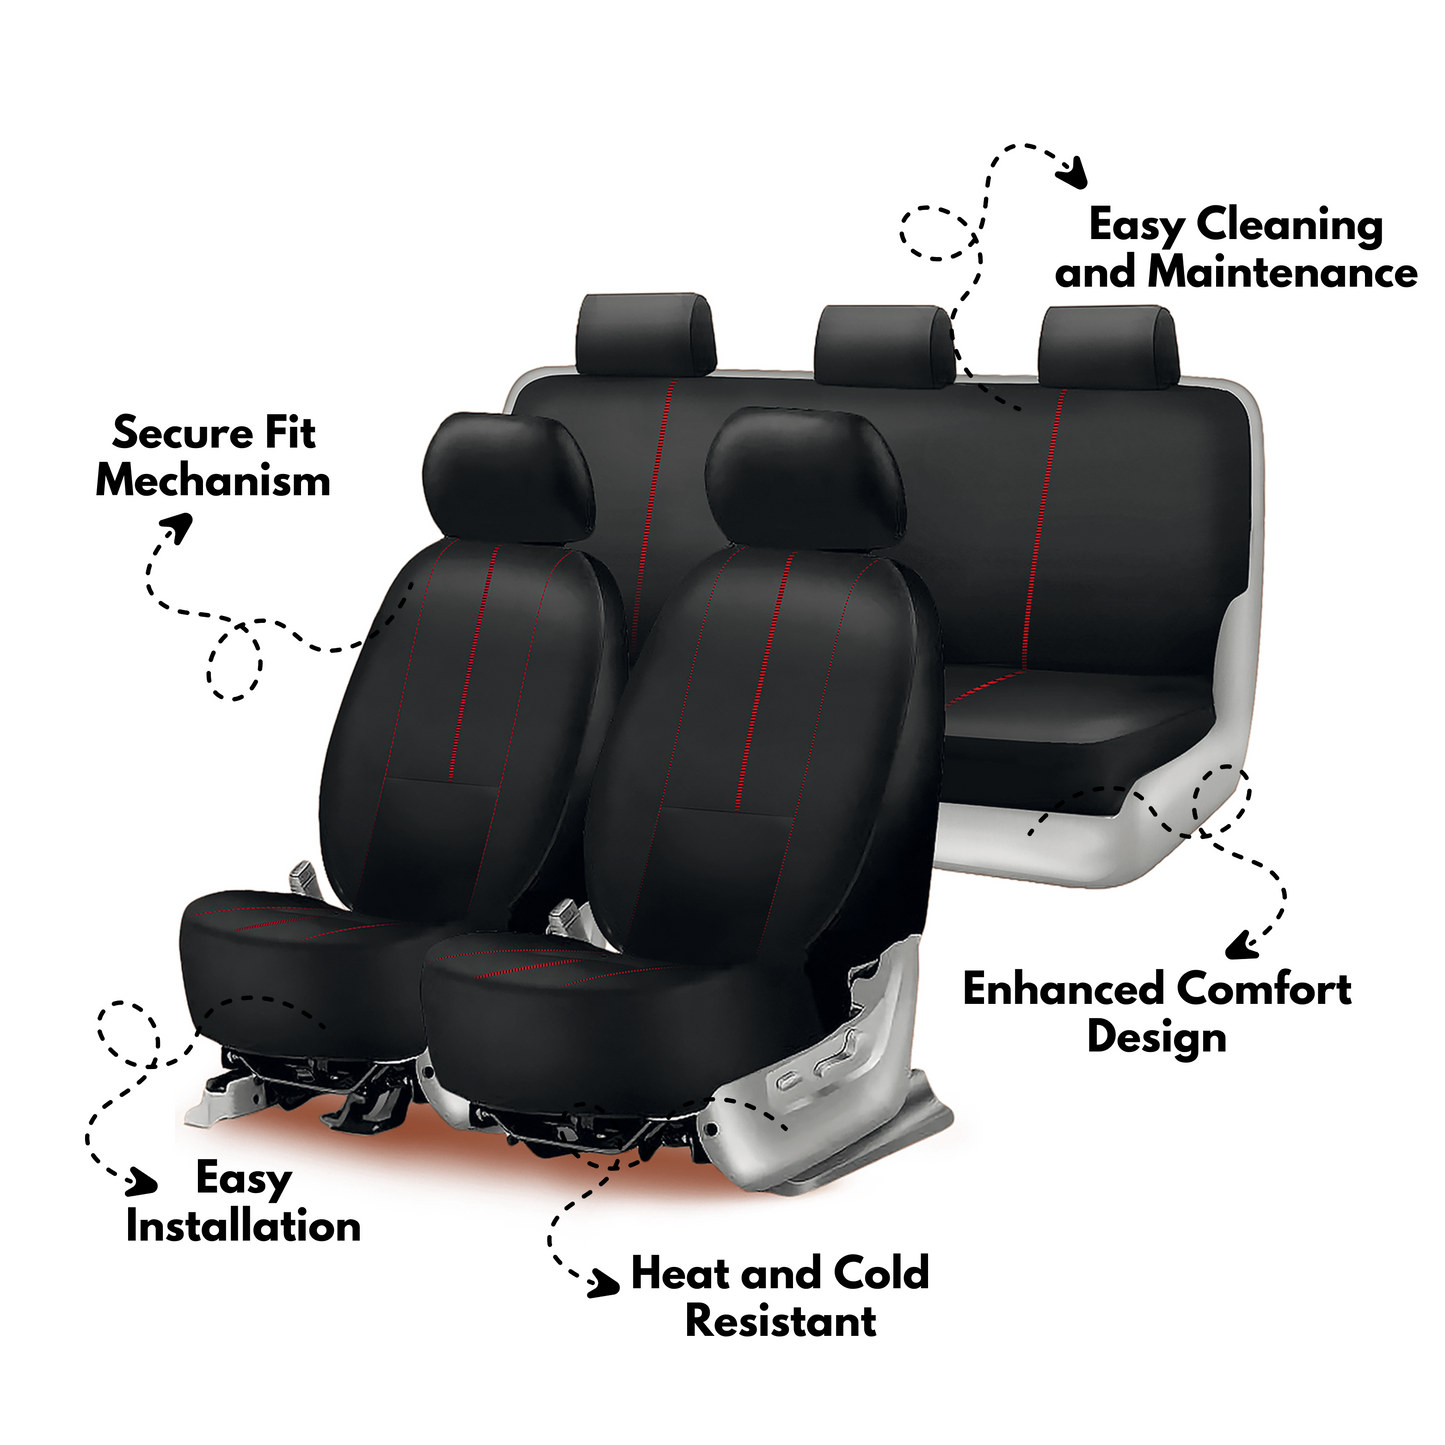 Cover DUO Bundle -  Seat Cover + Steering Wheel Cover